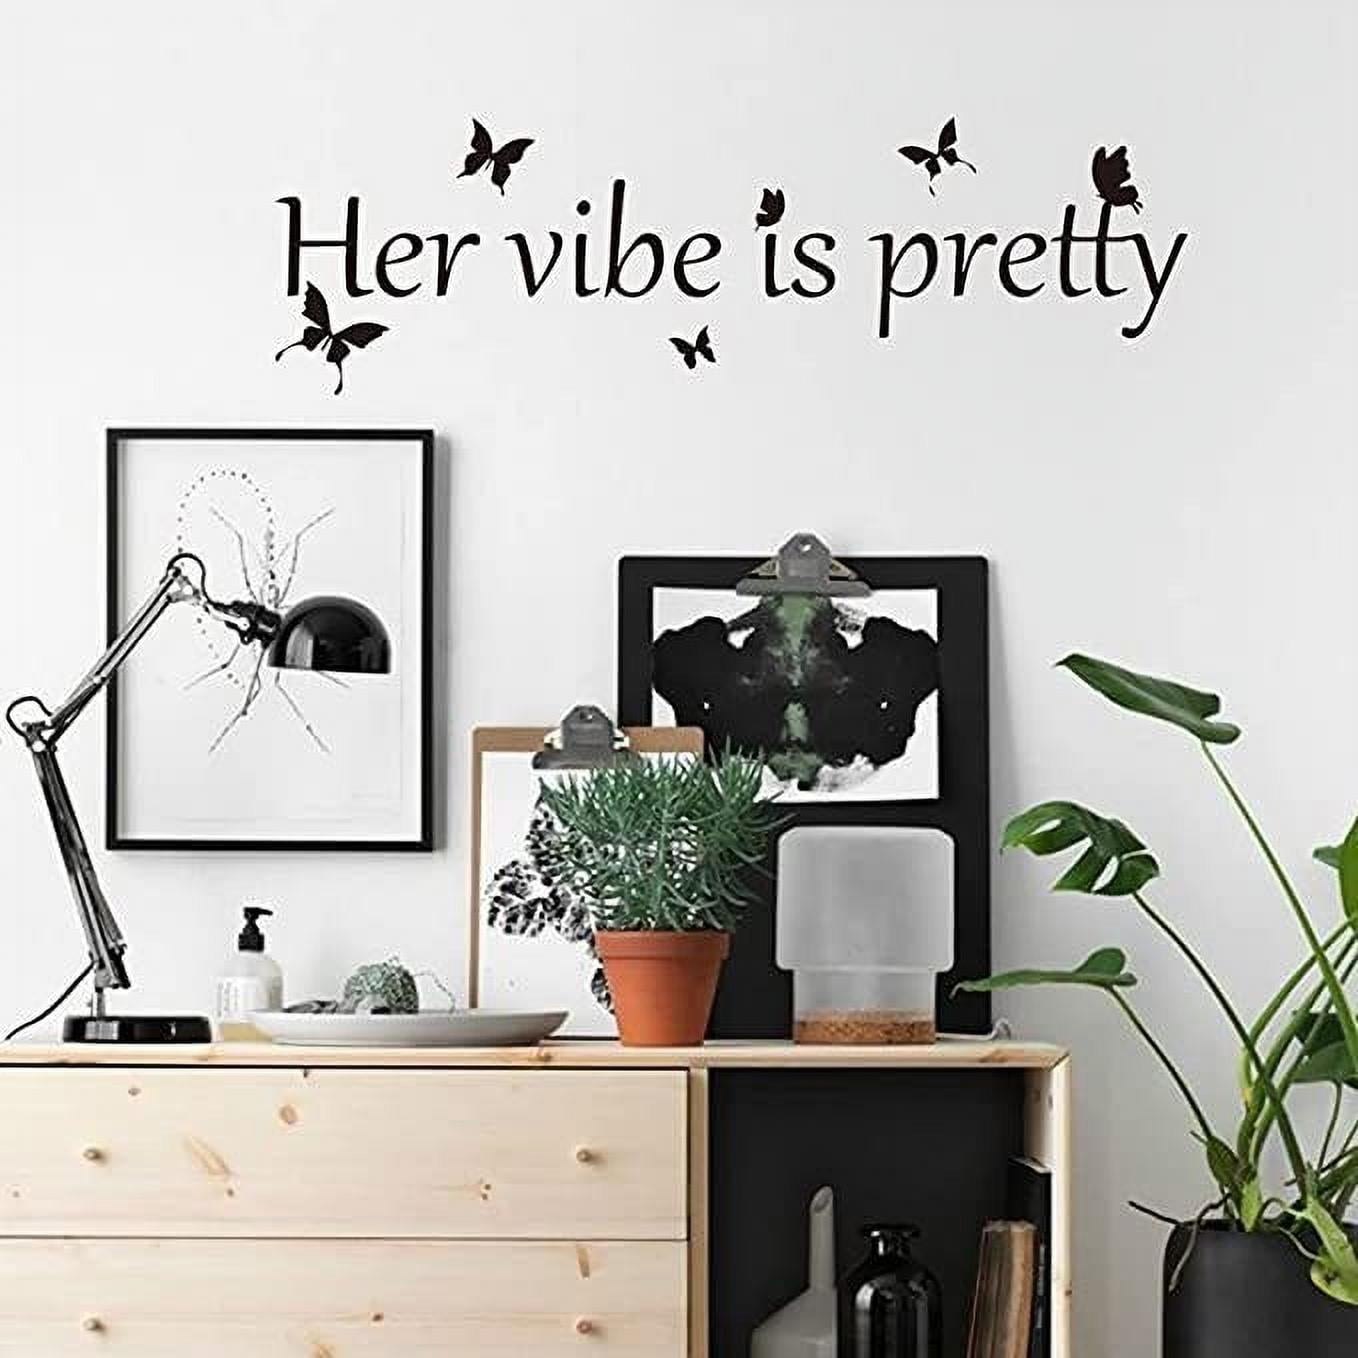 14 x 28 Black Design with Vinyl Moti 1676 2 Don't Forget to Be Awesome Today Text Lettering Inspirational Life Quote Peel & Stick Wall Sticker Decal